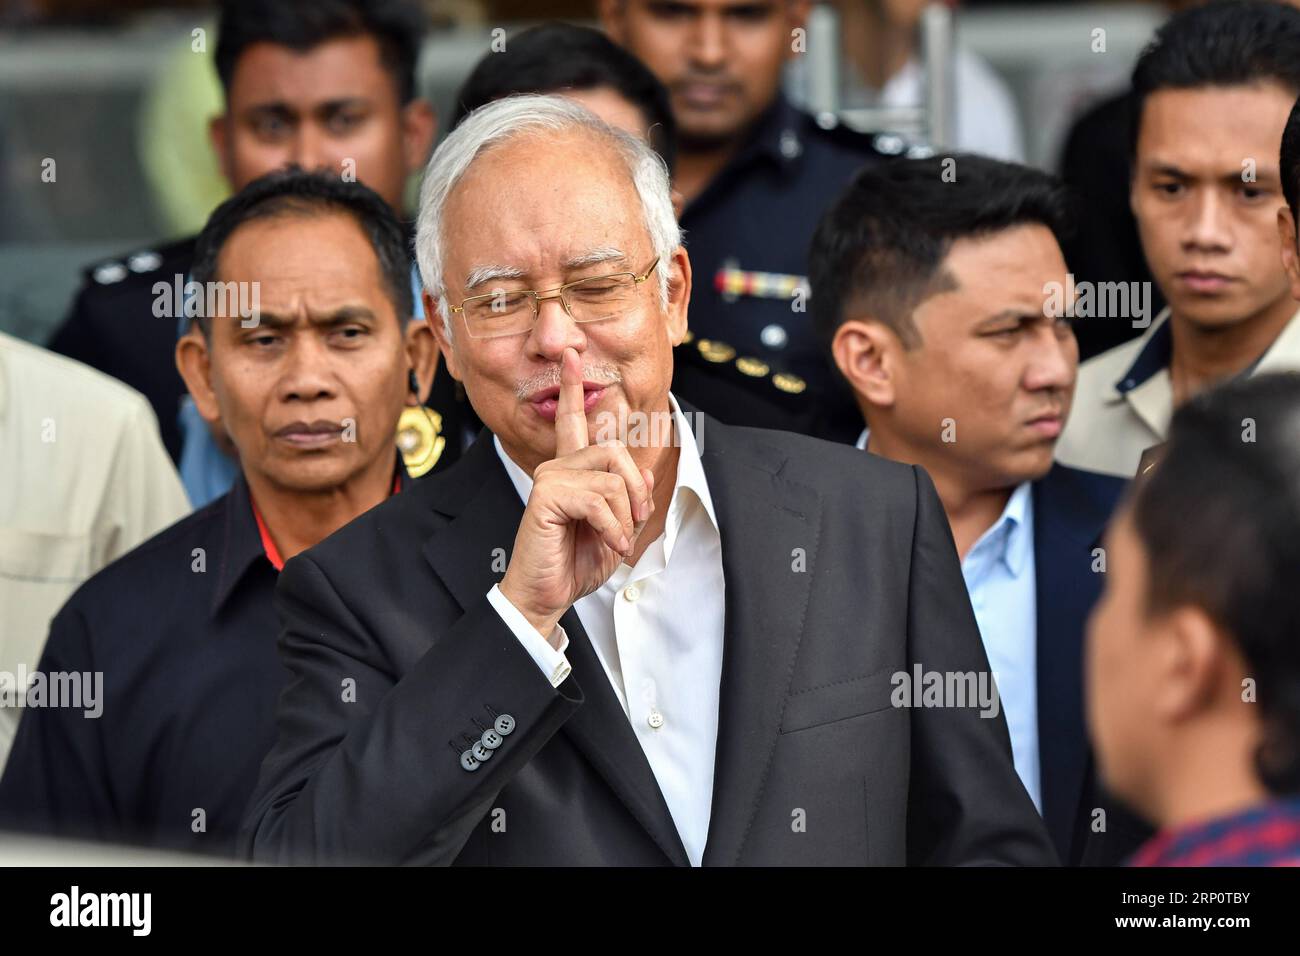 Bilder des Tages  (180524) -- PUTRAJAYA, May 24, 2018 -- Former Malaysian Prime Minister Najib Razak (C) leaves Malaysian Anti-Corruption Commission (MACC) headquarters in Putrajaya, Malaysia, May 24, 2018. Investigators questioned former Malaysian Prime Minister Najib Razak for more than six hours at the headquarters of the Malaysian Anti-Corruption Commission (MACC) on Thursday and let him go home as the probe related to the state development fund 1MDB continues. ) (lrz) MALAYSIA-PUTRAJAYA-NAJIB-CORRUPTION ChongxVoonxChung PUBLICATIONxNOTxINxCHN Stock Photo